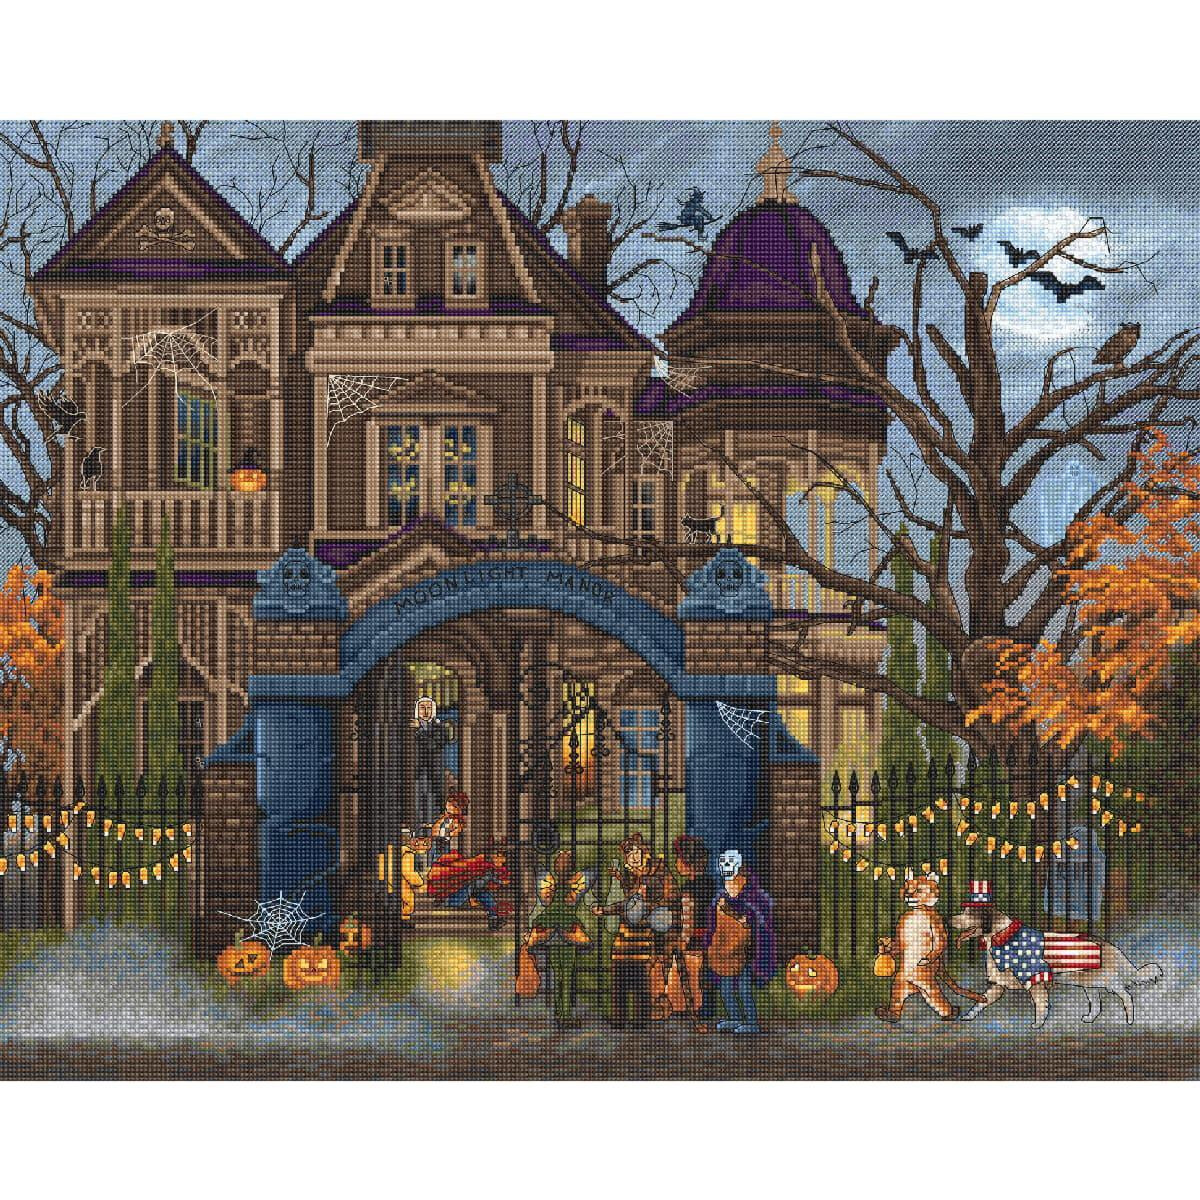 A spooky, detailed Victorian-style mansion decorated for...